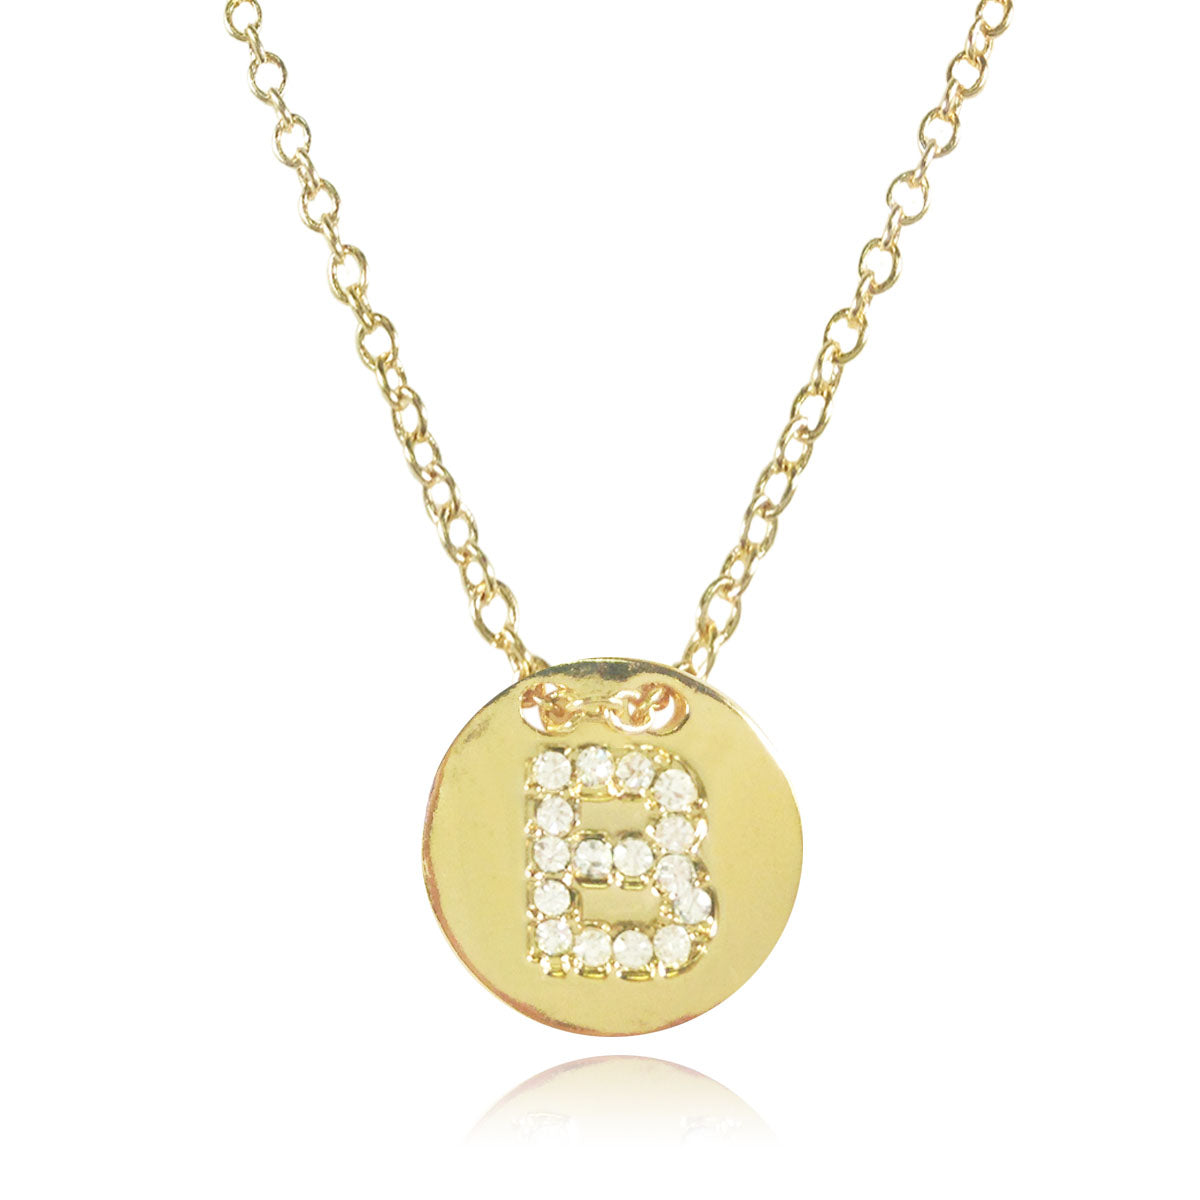 Gold Plated Initial Letter Pendant Necklace